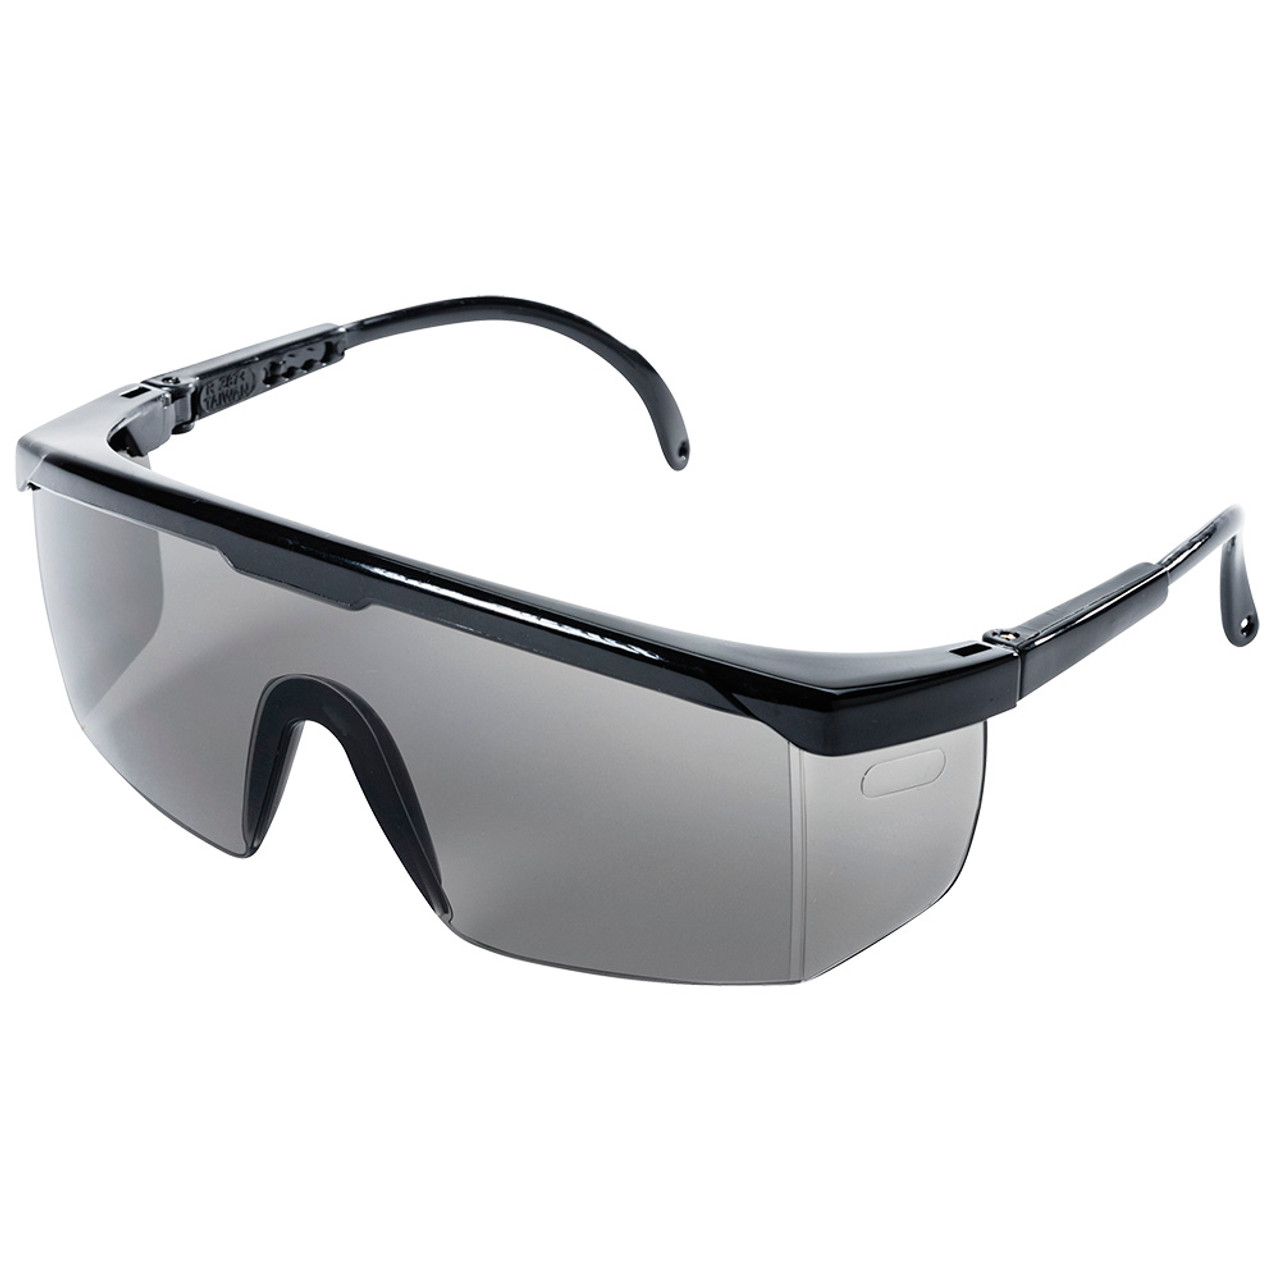 Sellstrom® Sebring Hard Coated Safety Glasses - Smoke Tint - Black Frames w/Extendable Arms  S76371